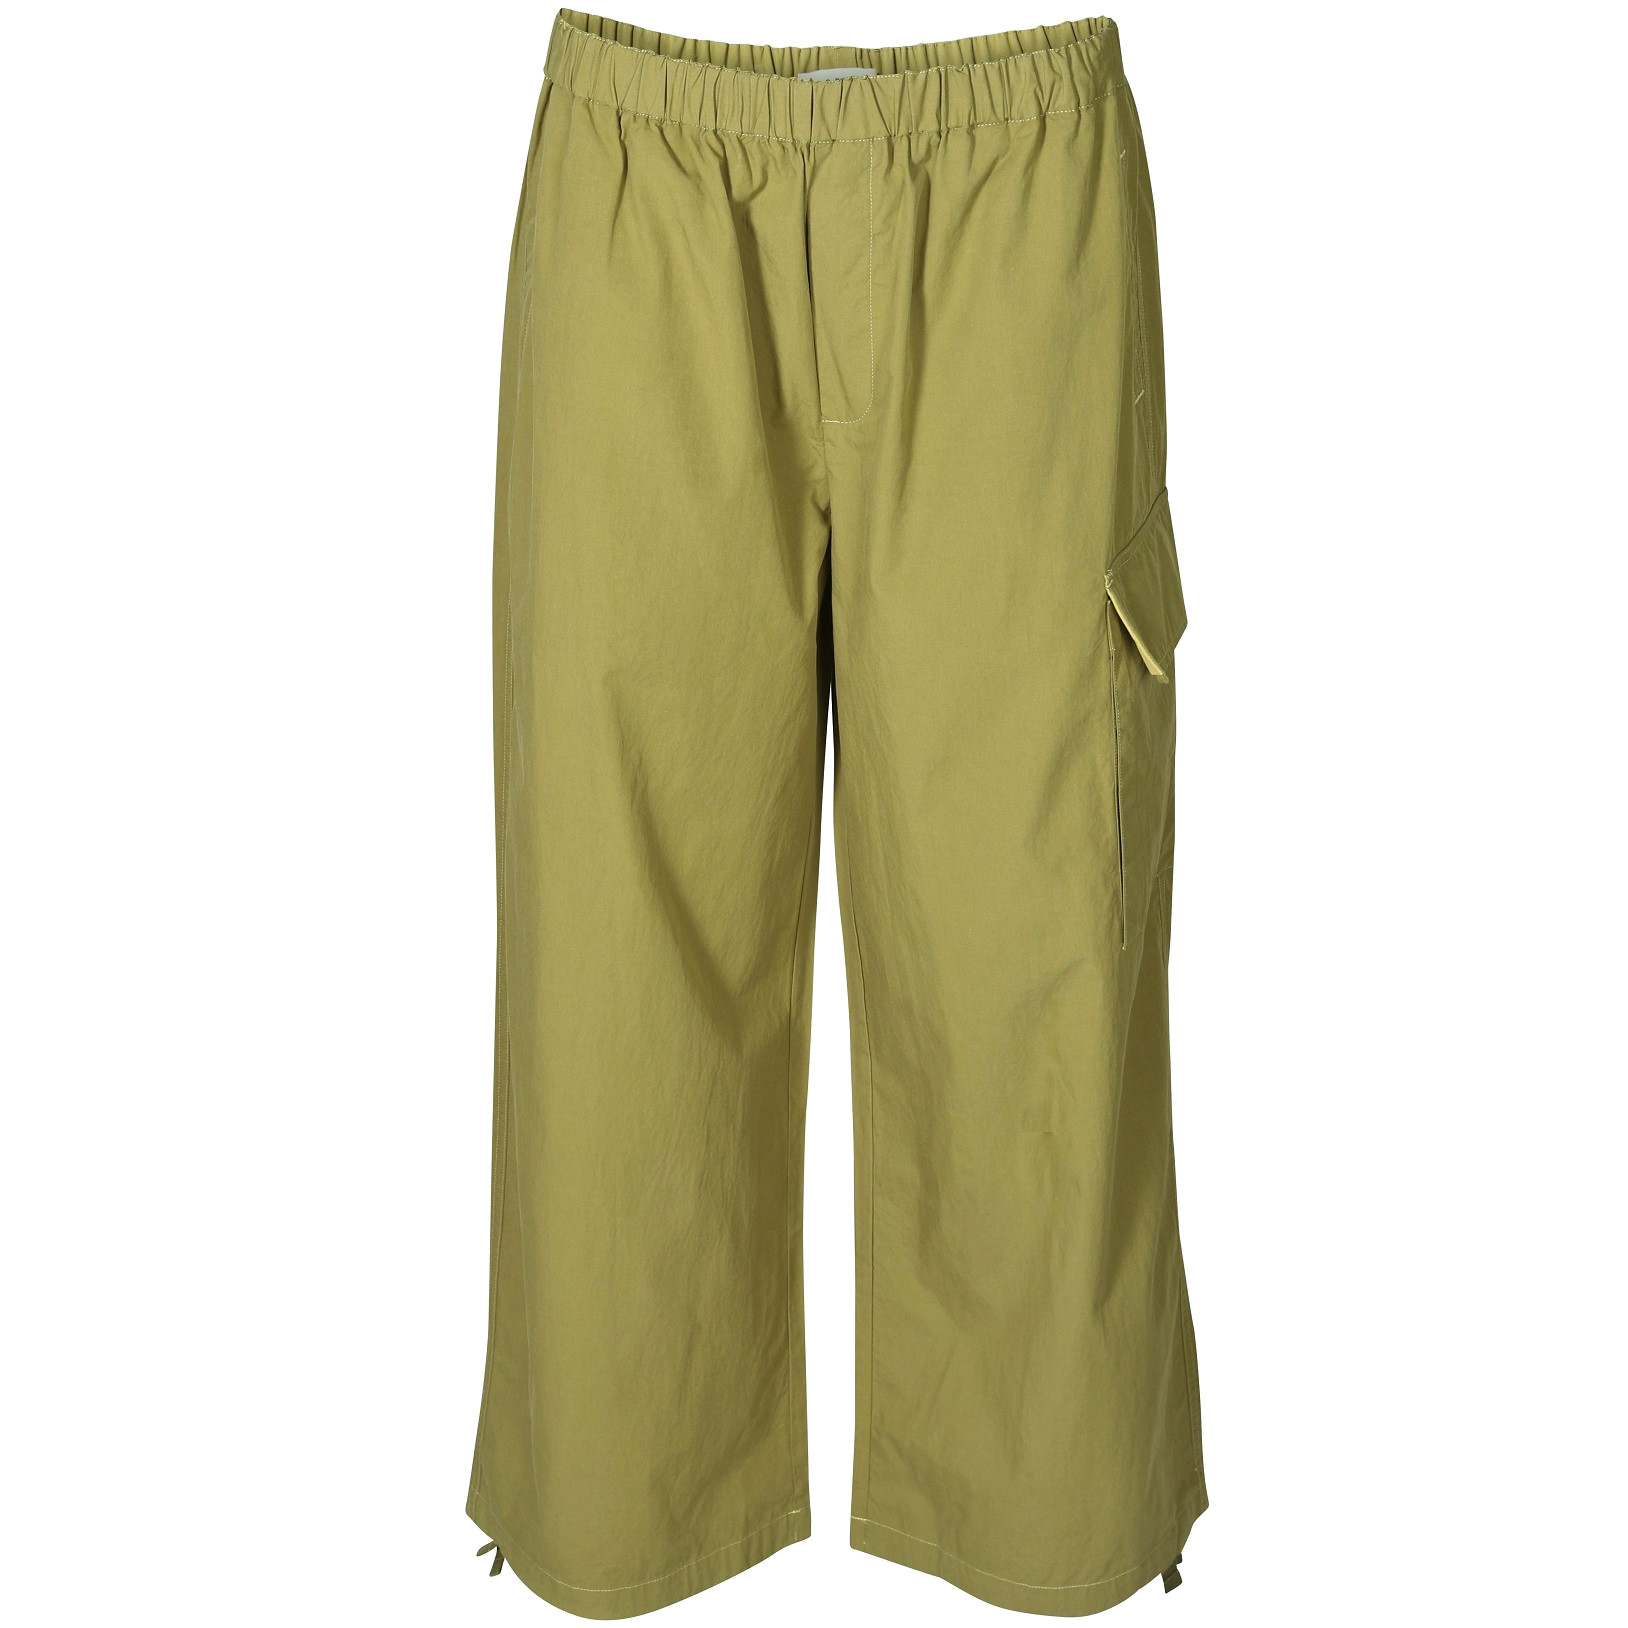 6397 Vacation Pant in Bright Army